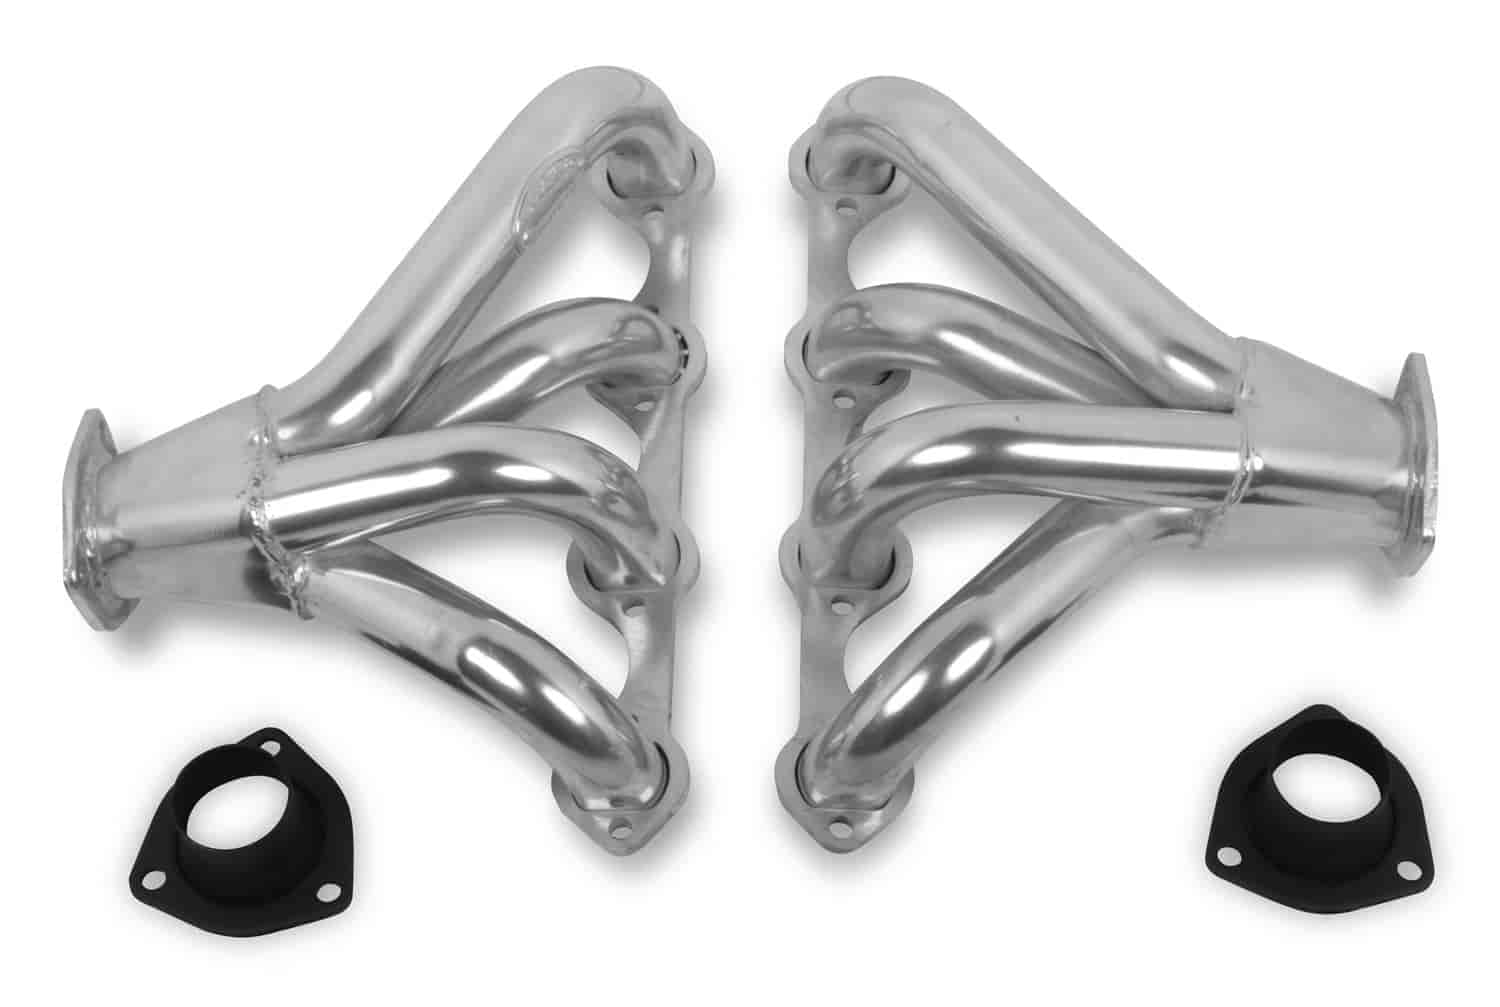 Super Competition Block Hugger Headers 255-302W Ford Small Block V8